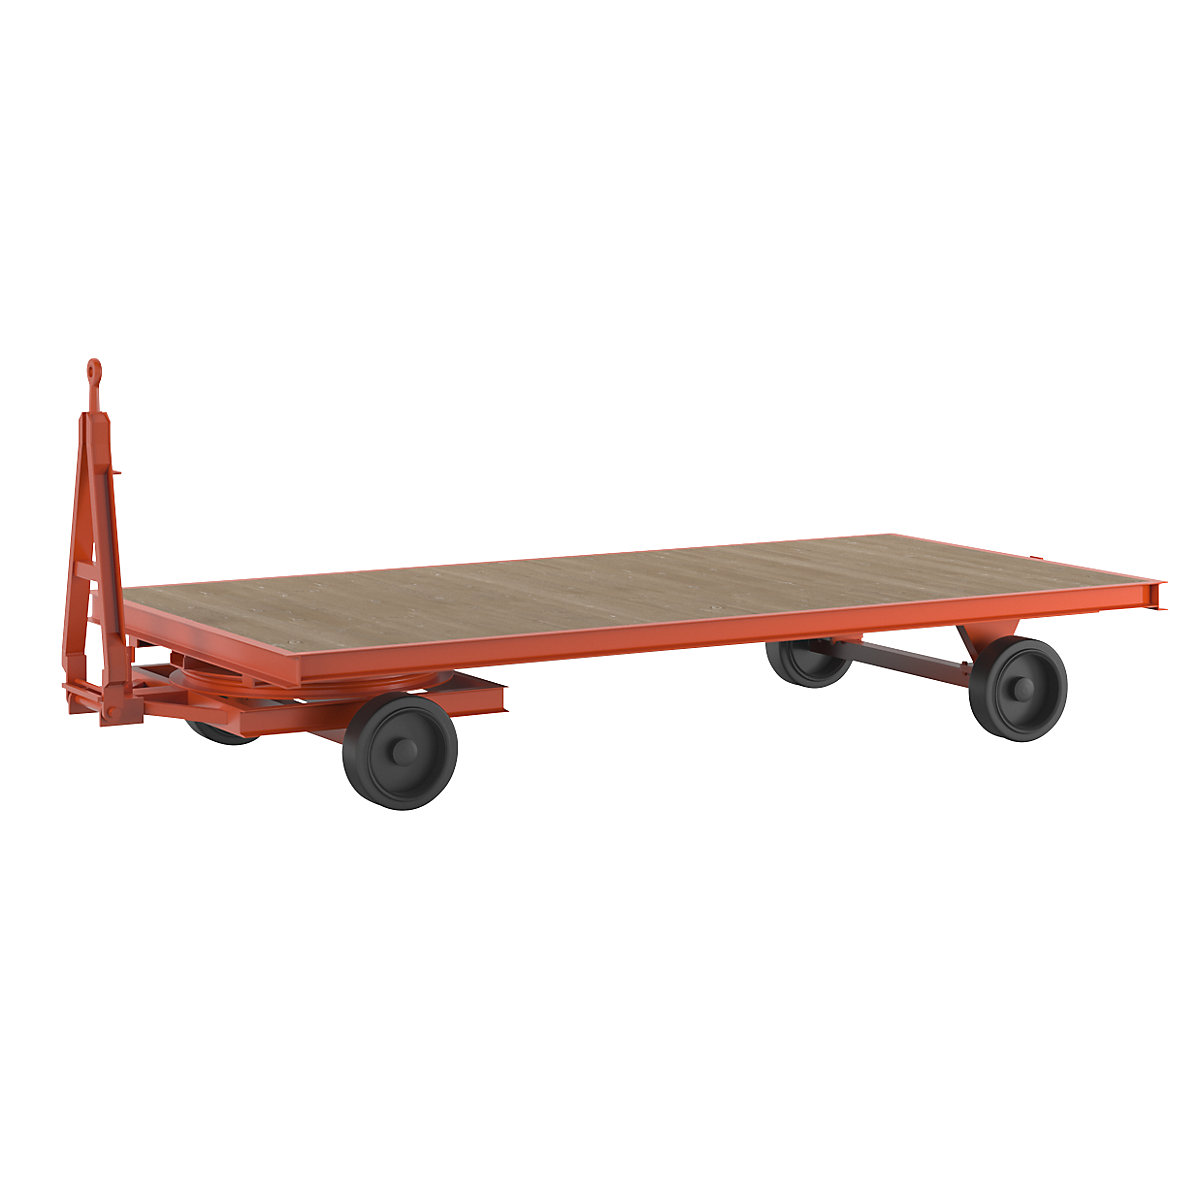 Trailer, 2-wheel turntable steering, max. load 8 t, platform 4.0 x 2.0 m, solid rubber tyres-13